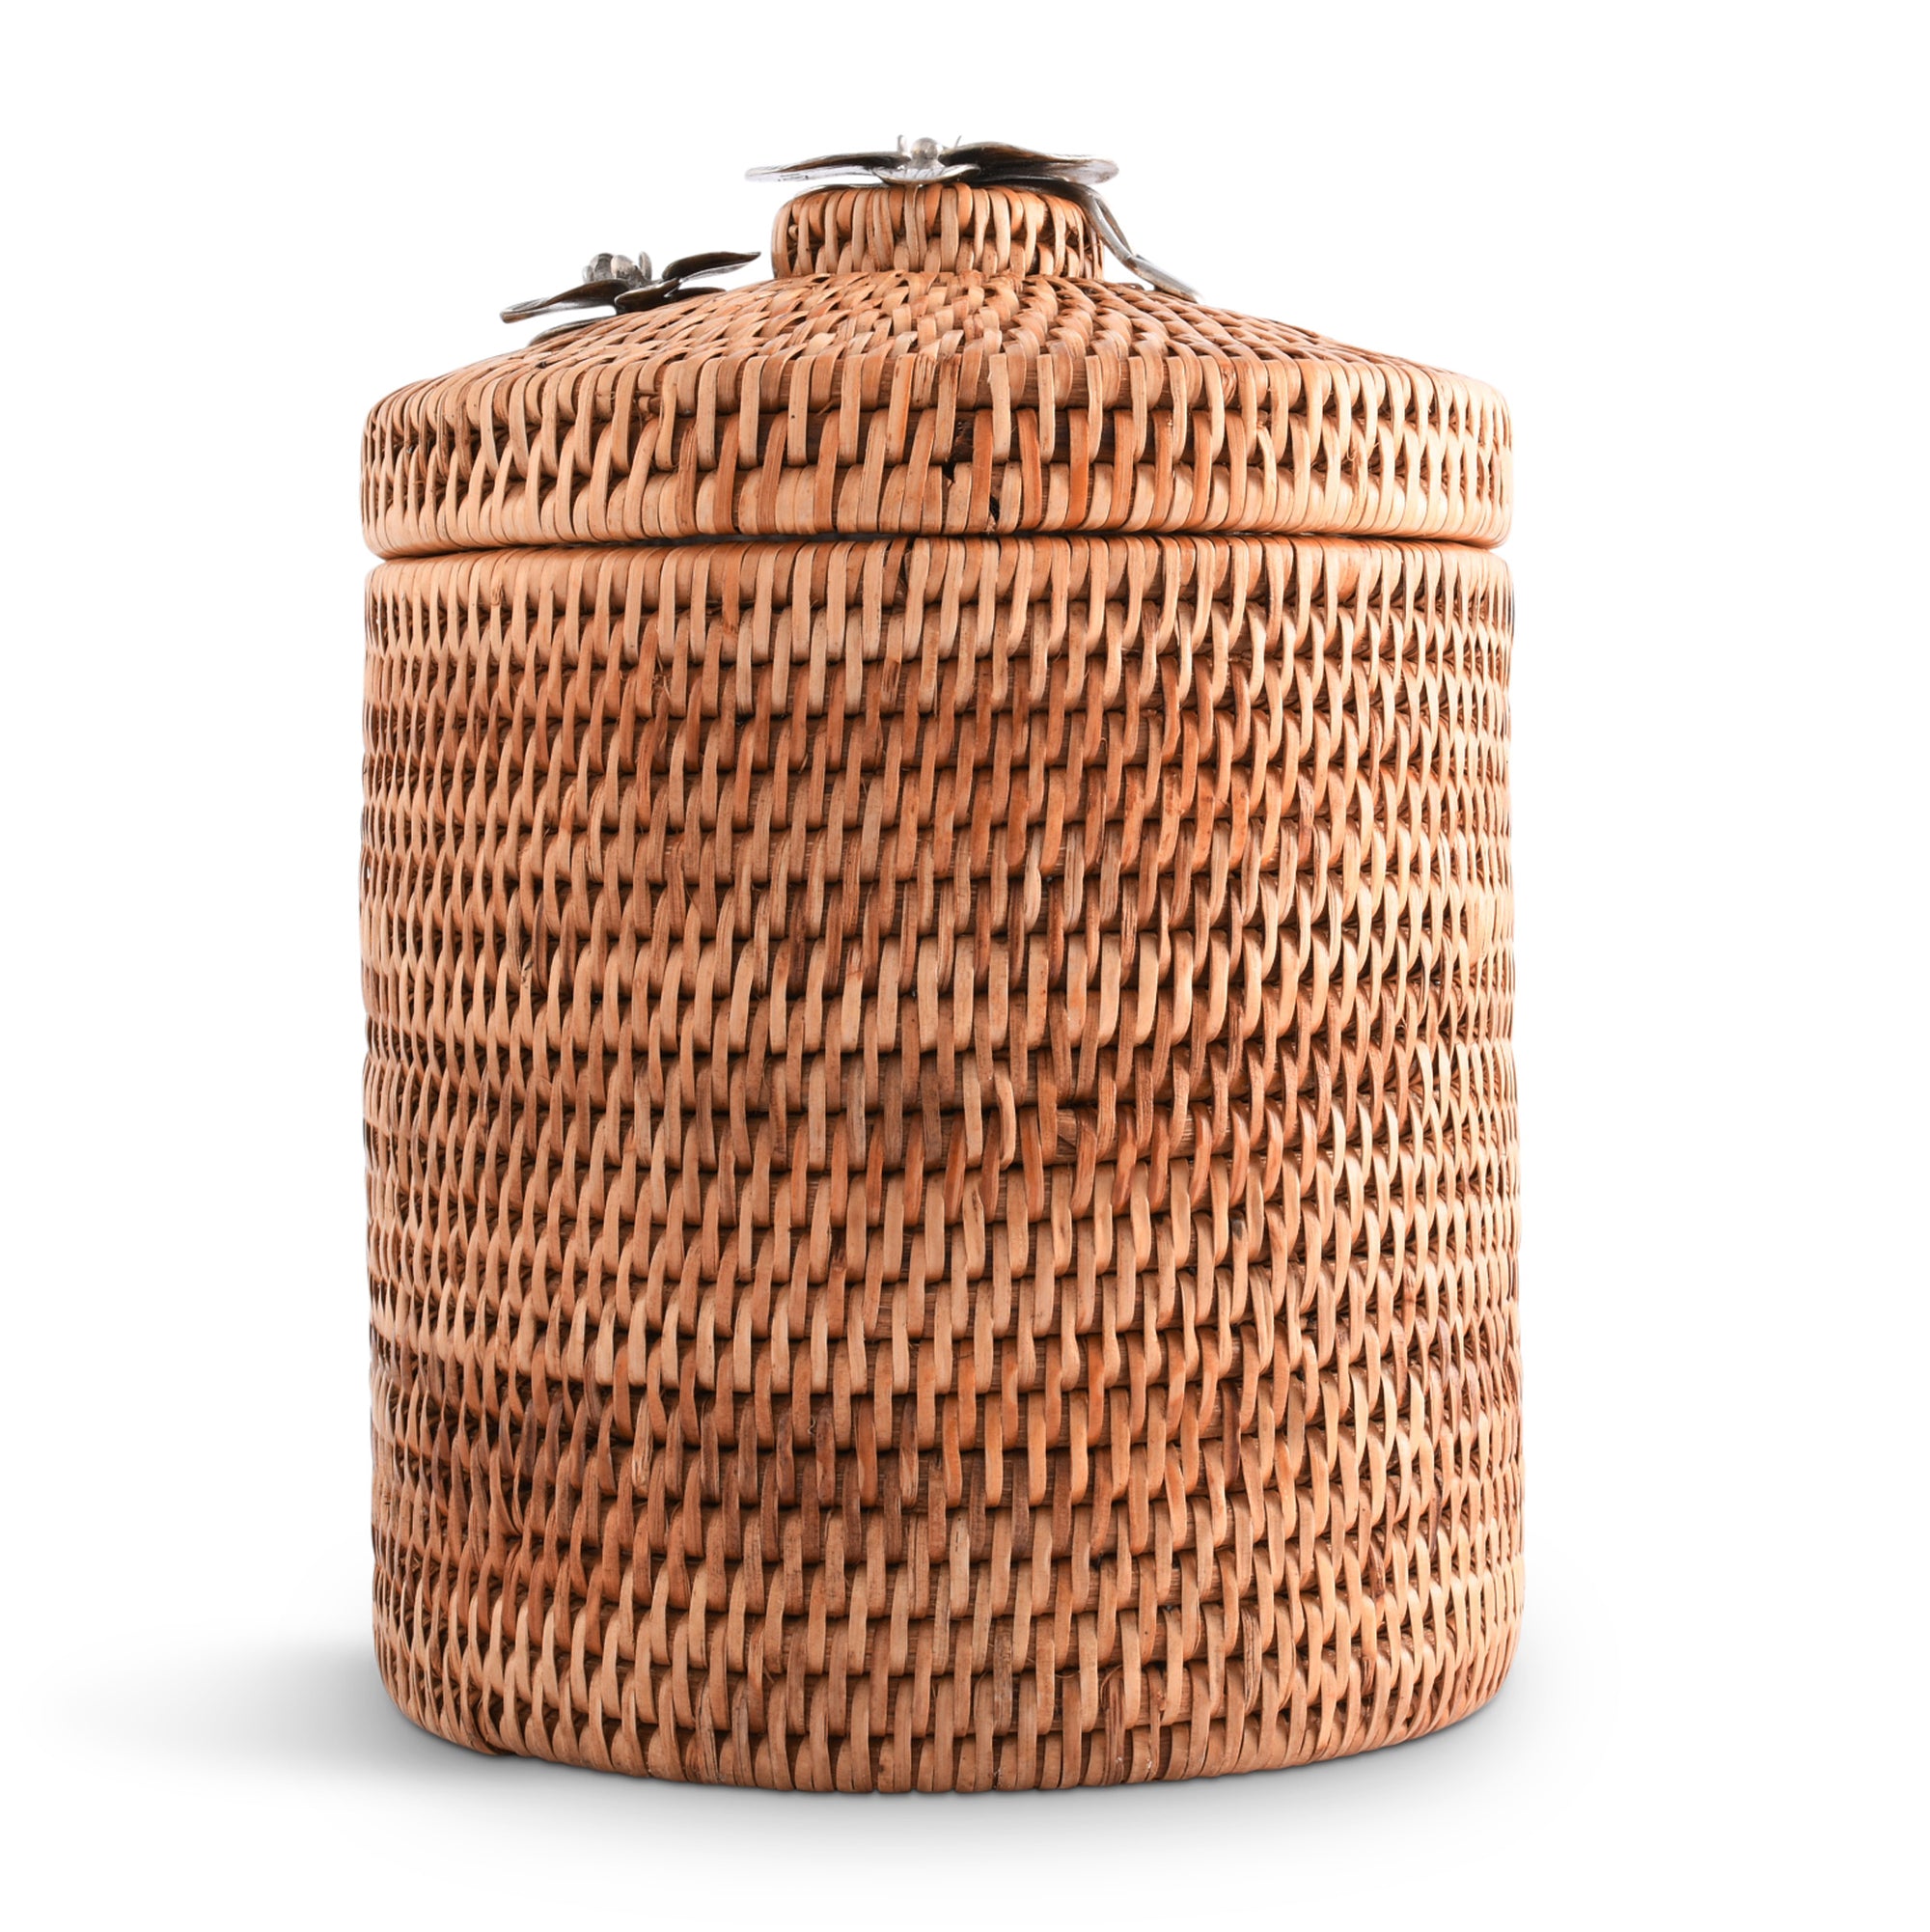 Vagabond House Orchids Hand Woven Wicker Rattan Lidded Ice Bucket Product Image